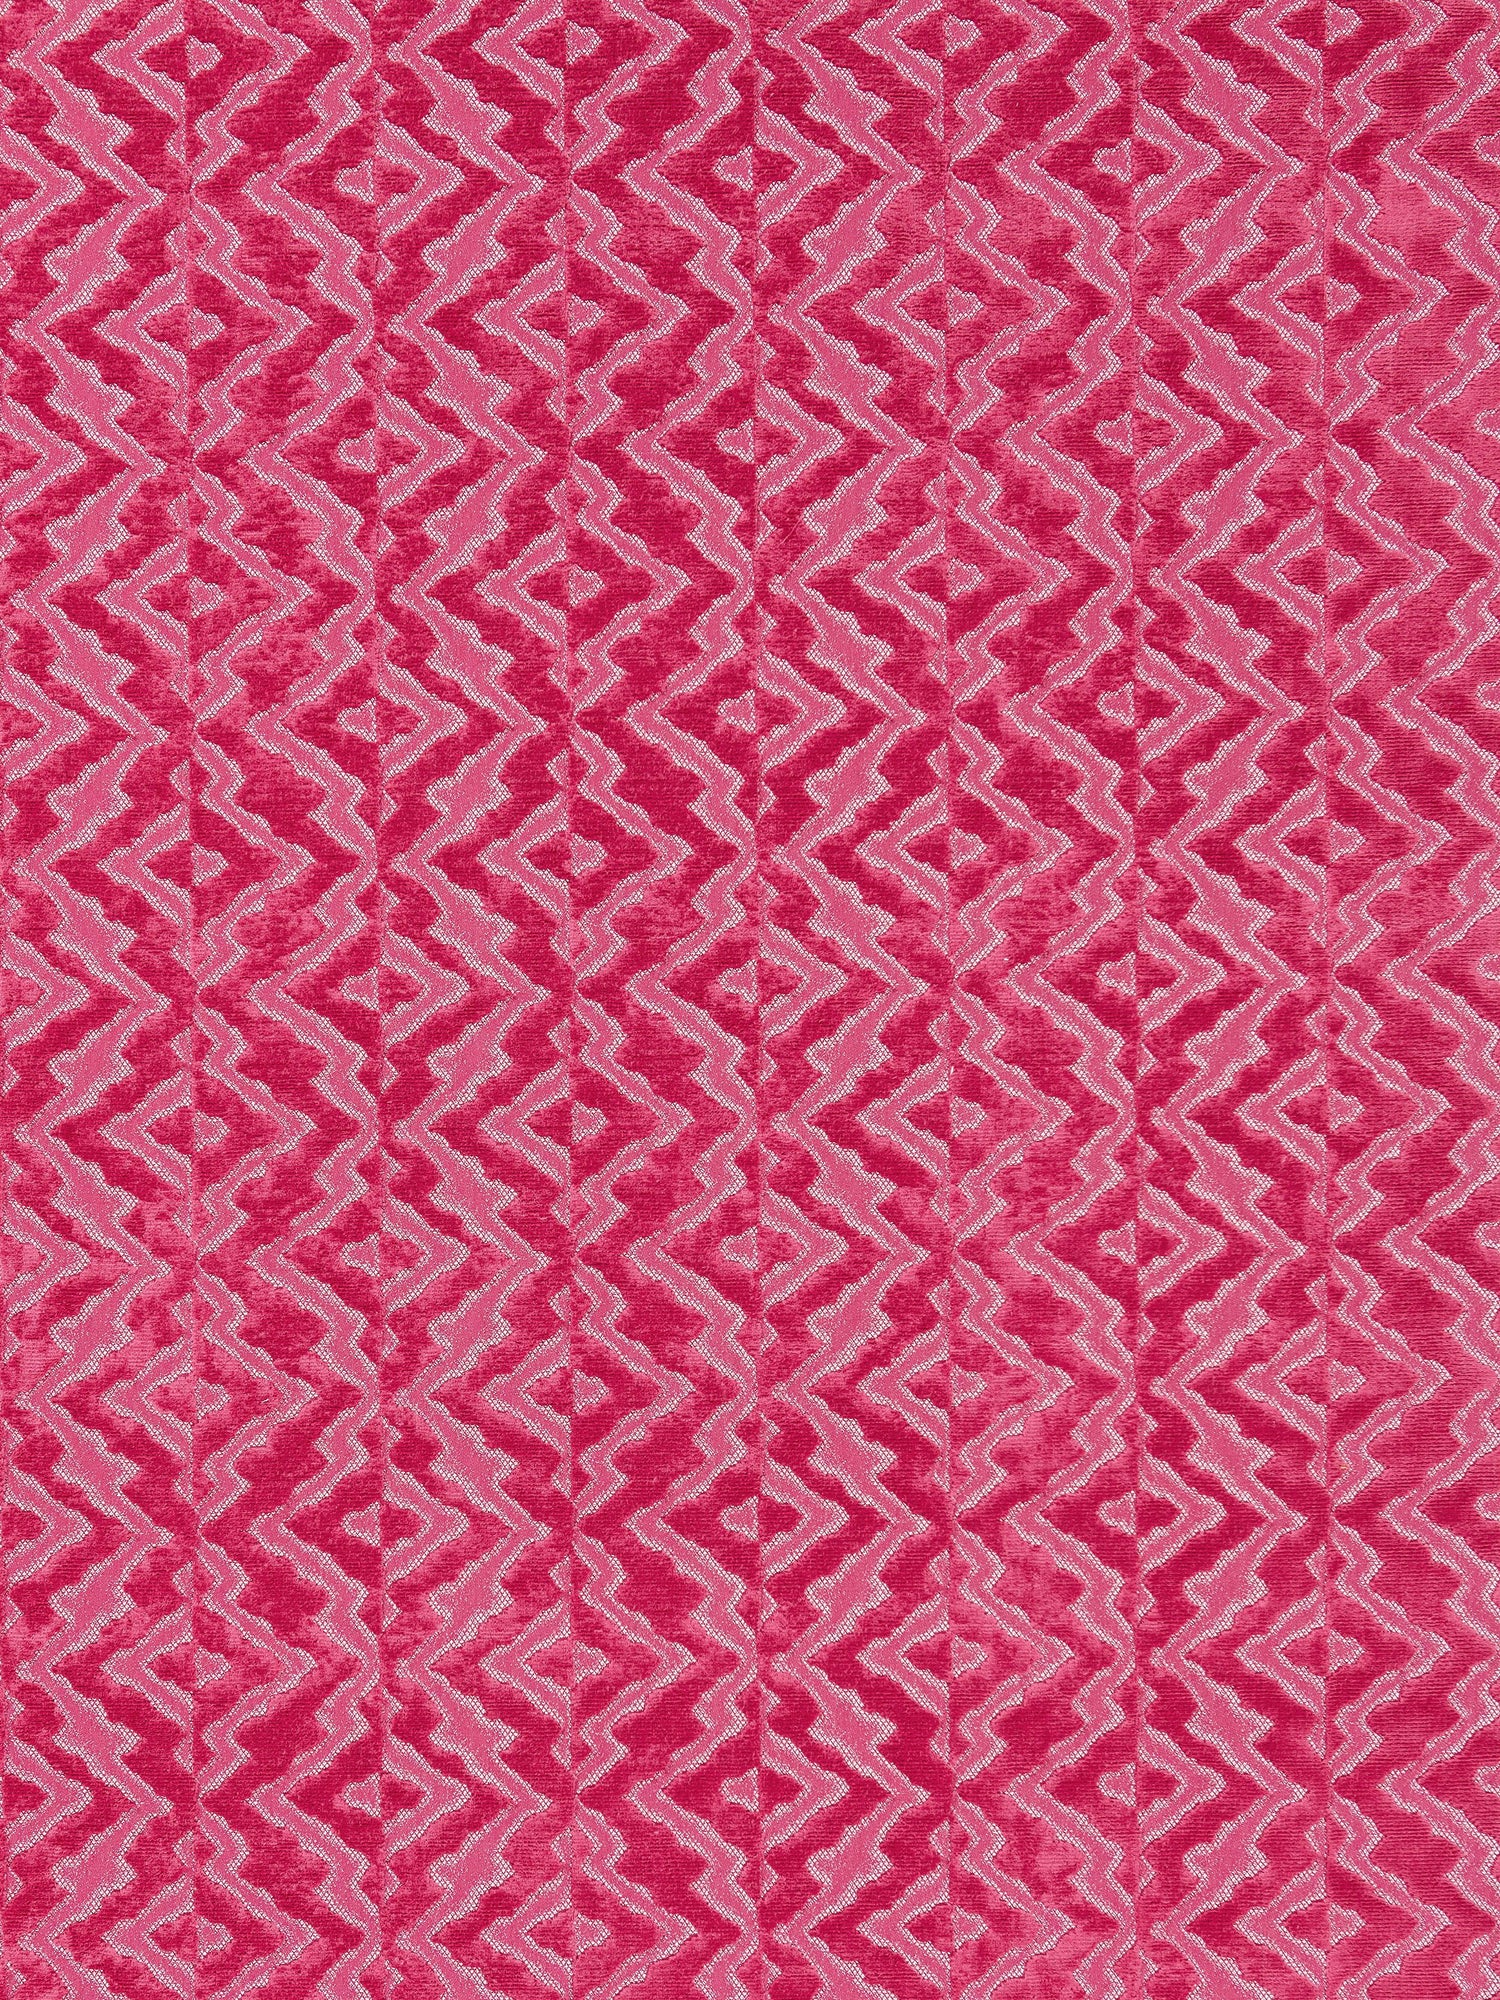 Echo Velvet fabric in raspberry color - pattern number SC 000327085 - by Scalamandre in the Scalamandre Fabrics Book 1 collection